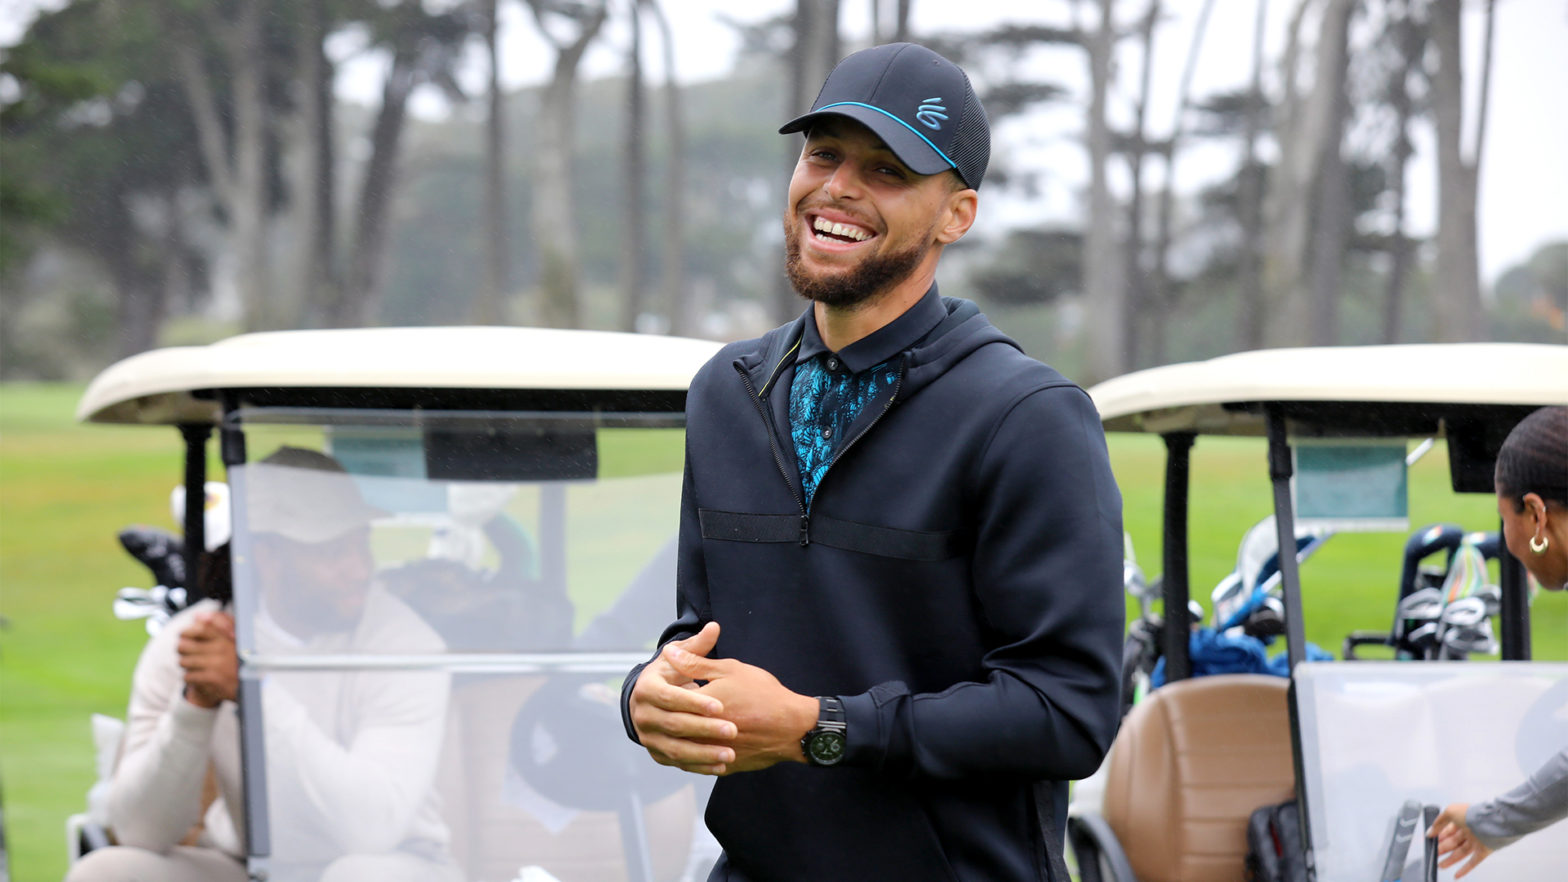 LinksDAO NFT Prices Soar After Stephen Curry Secures A Membership